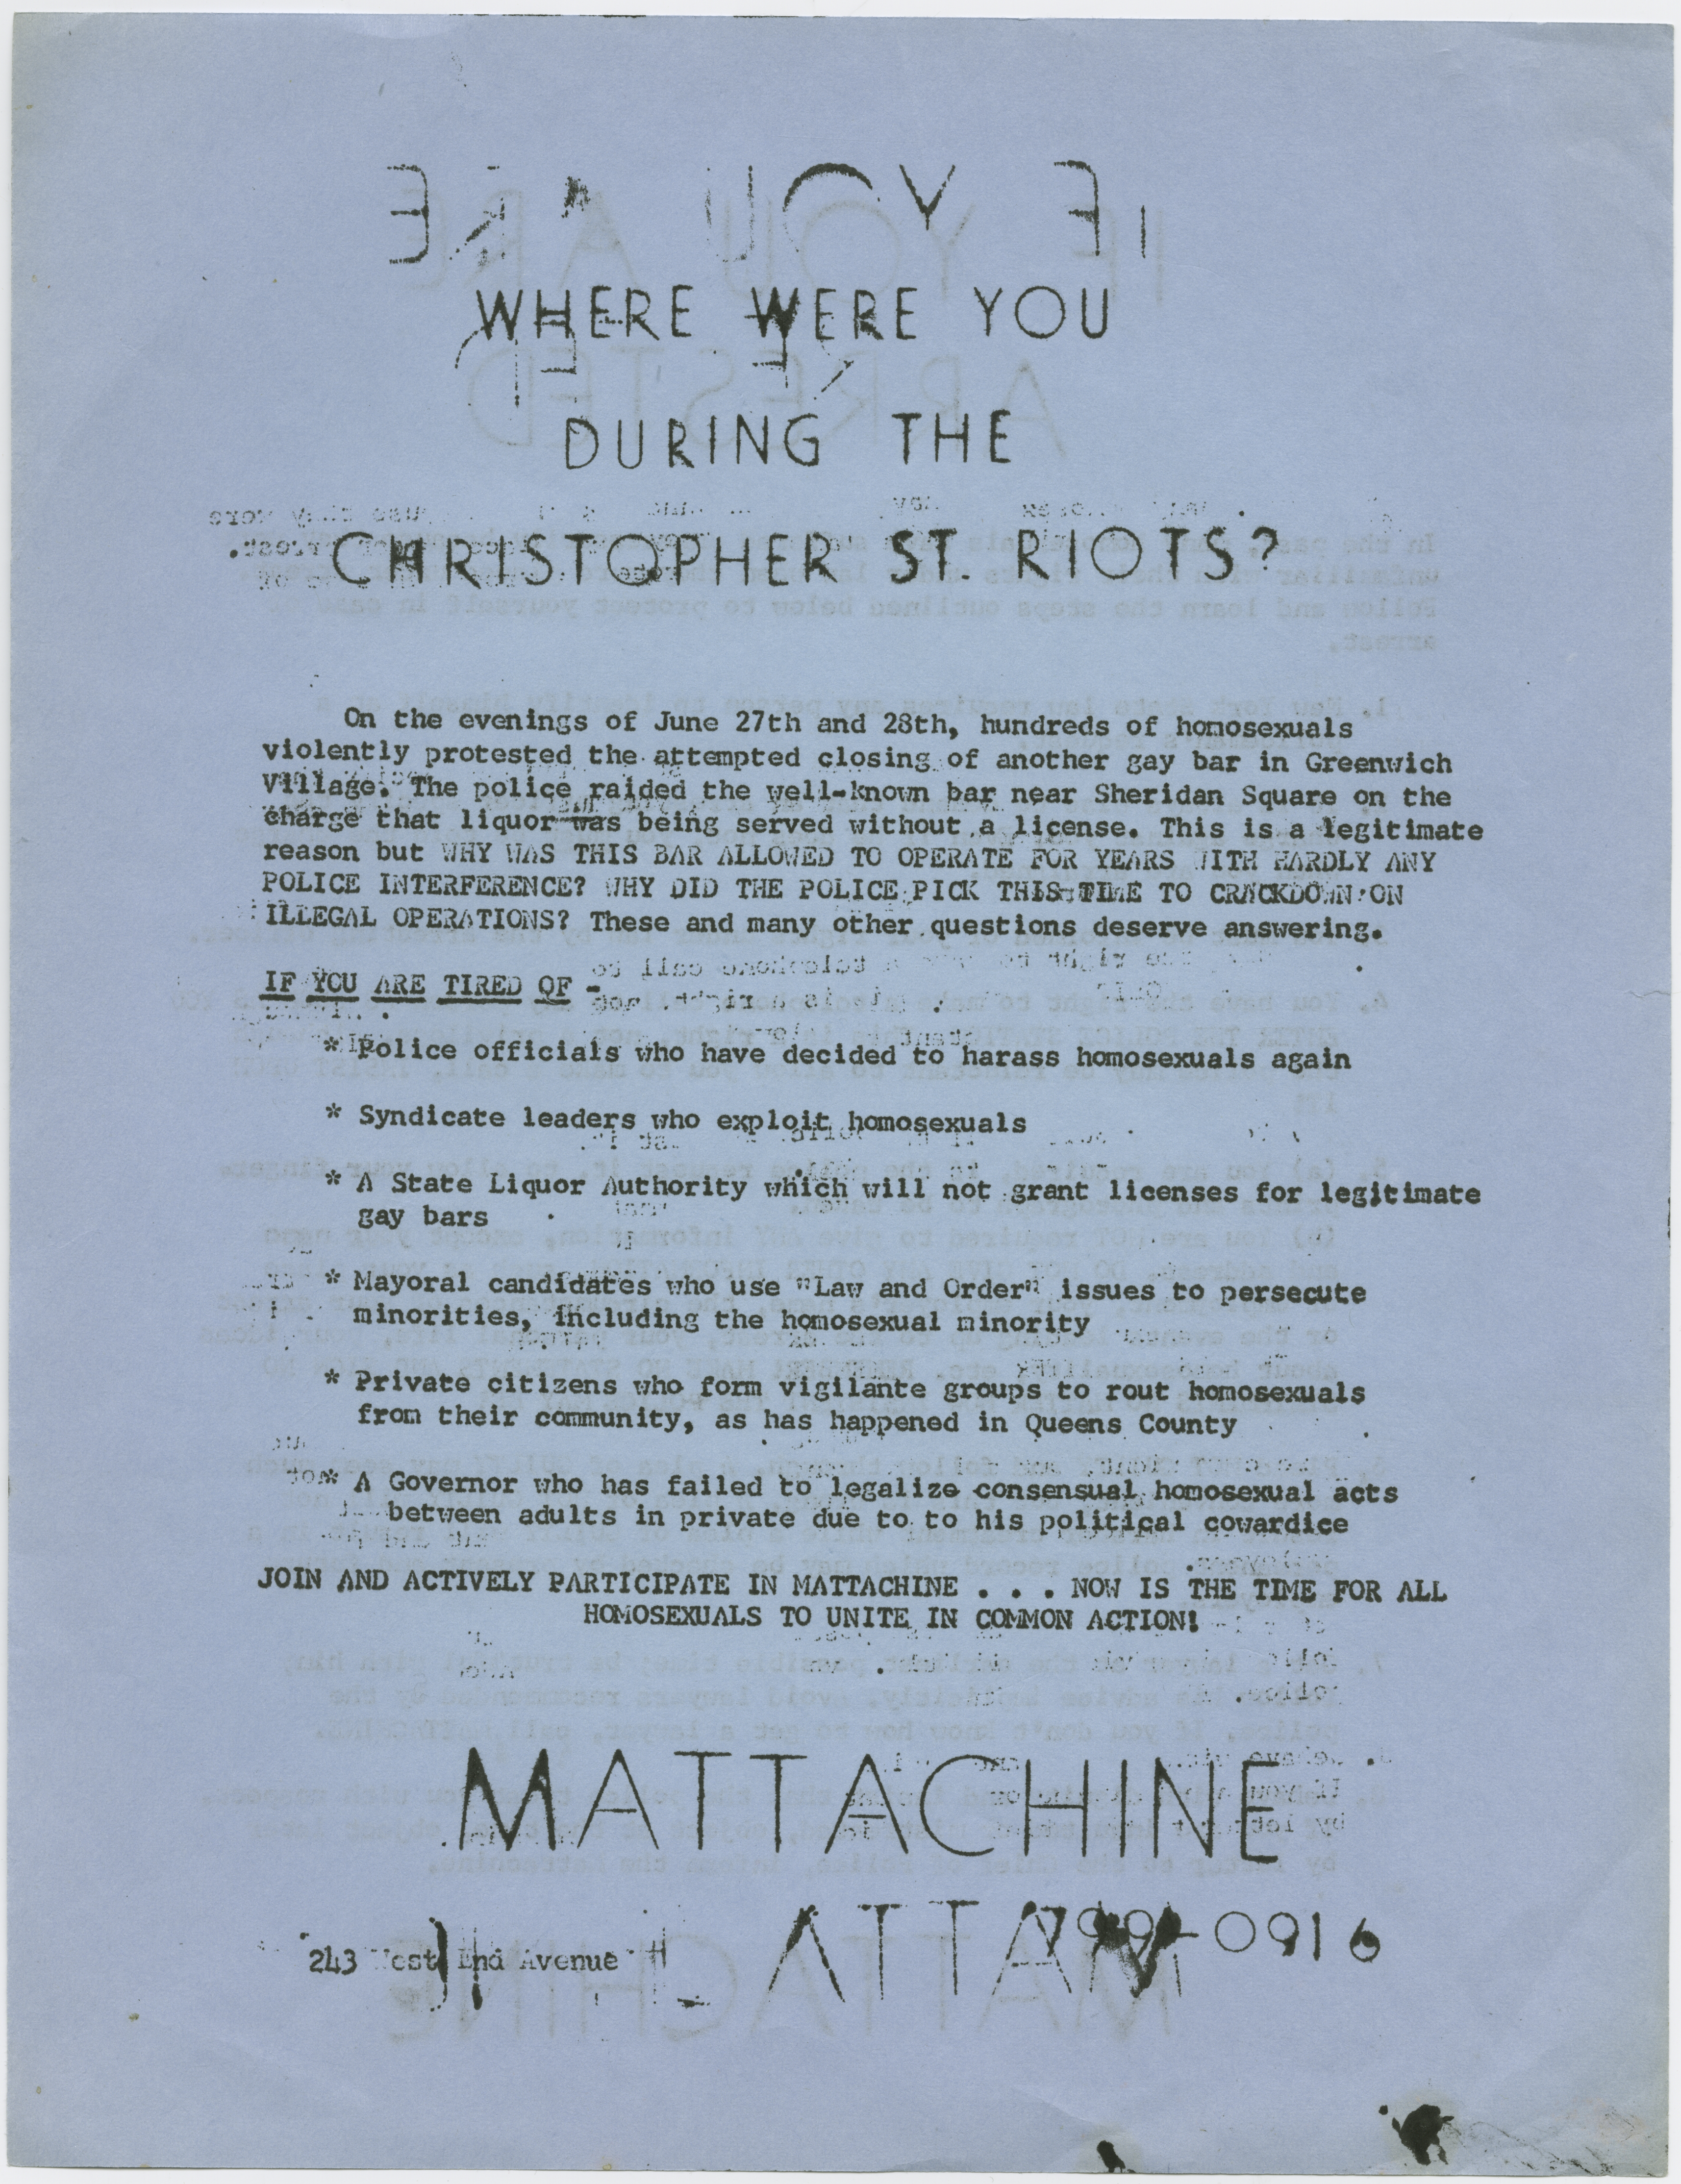 Mattachine Society, Inc. of New York. "Where were you during the Christopher Street Riots?" (Mattachine Society, Inc. of New York / Records Manuscripts and Archives Division / The New York Public Library)